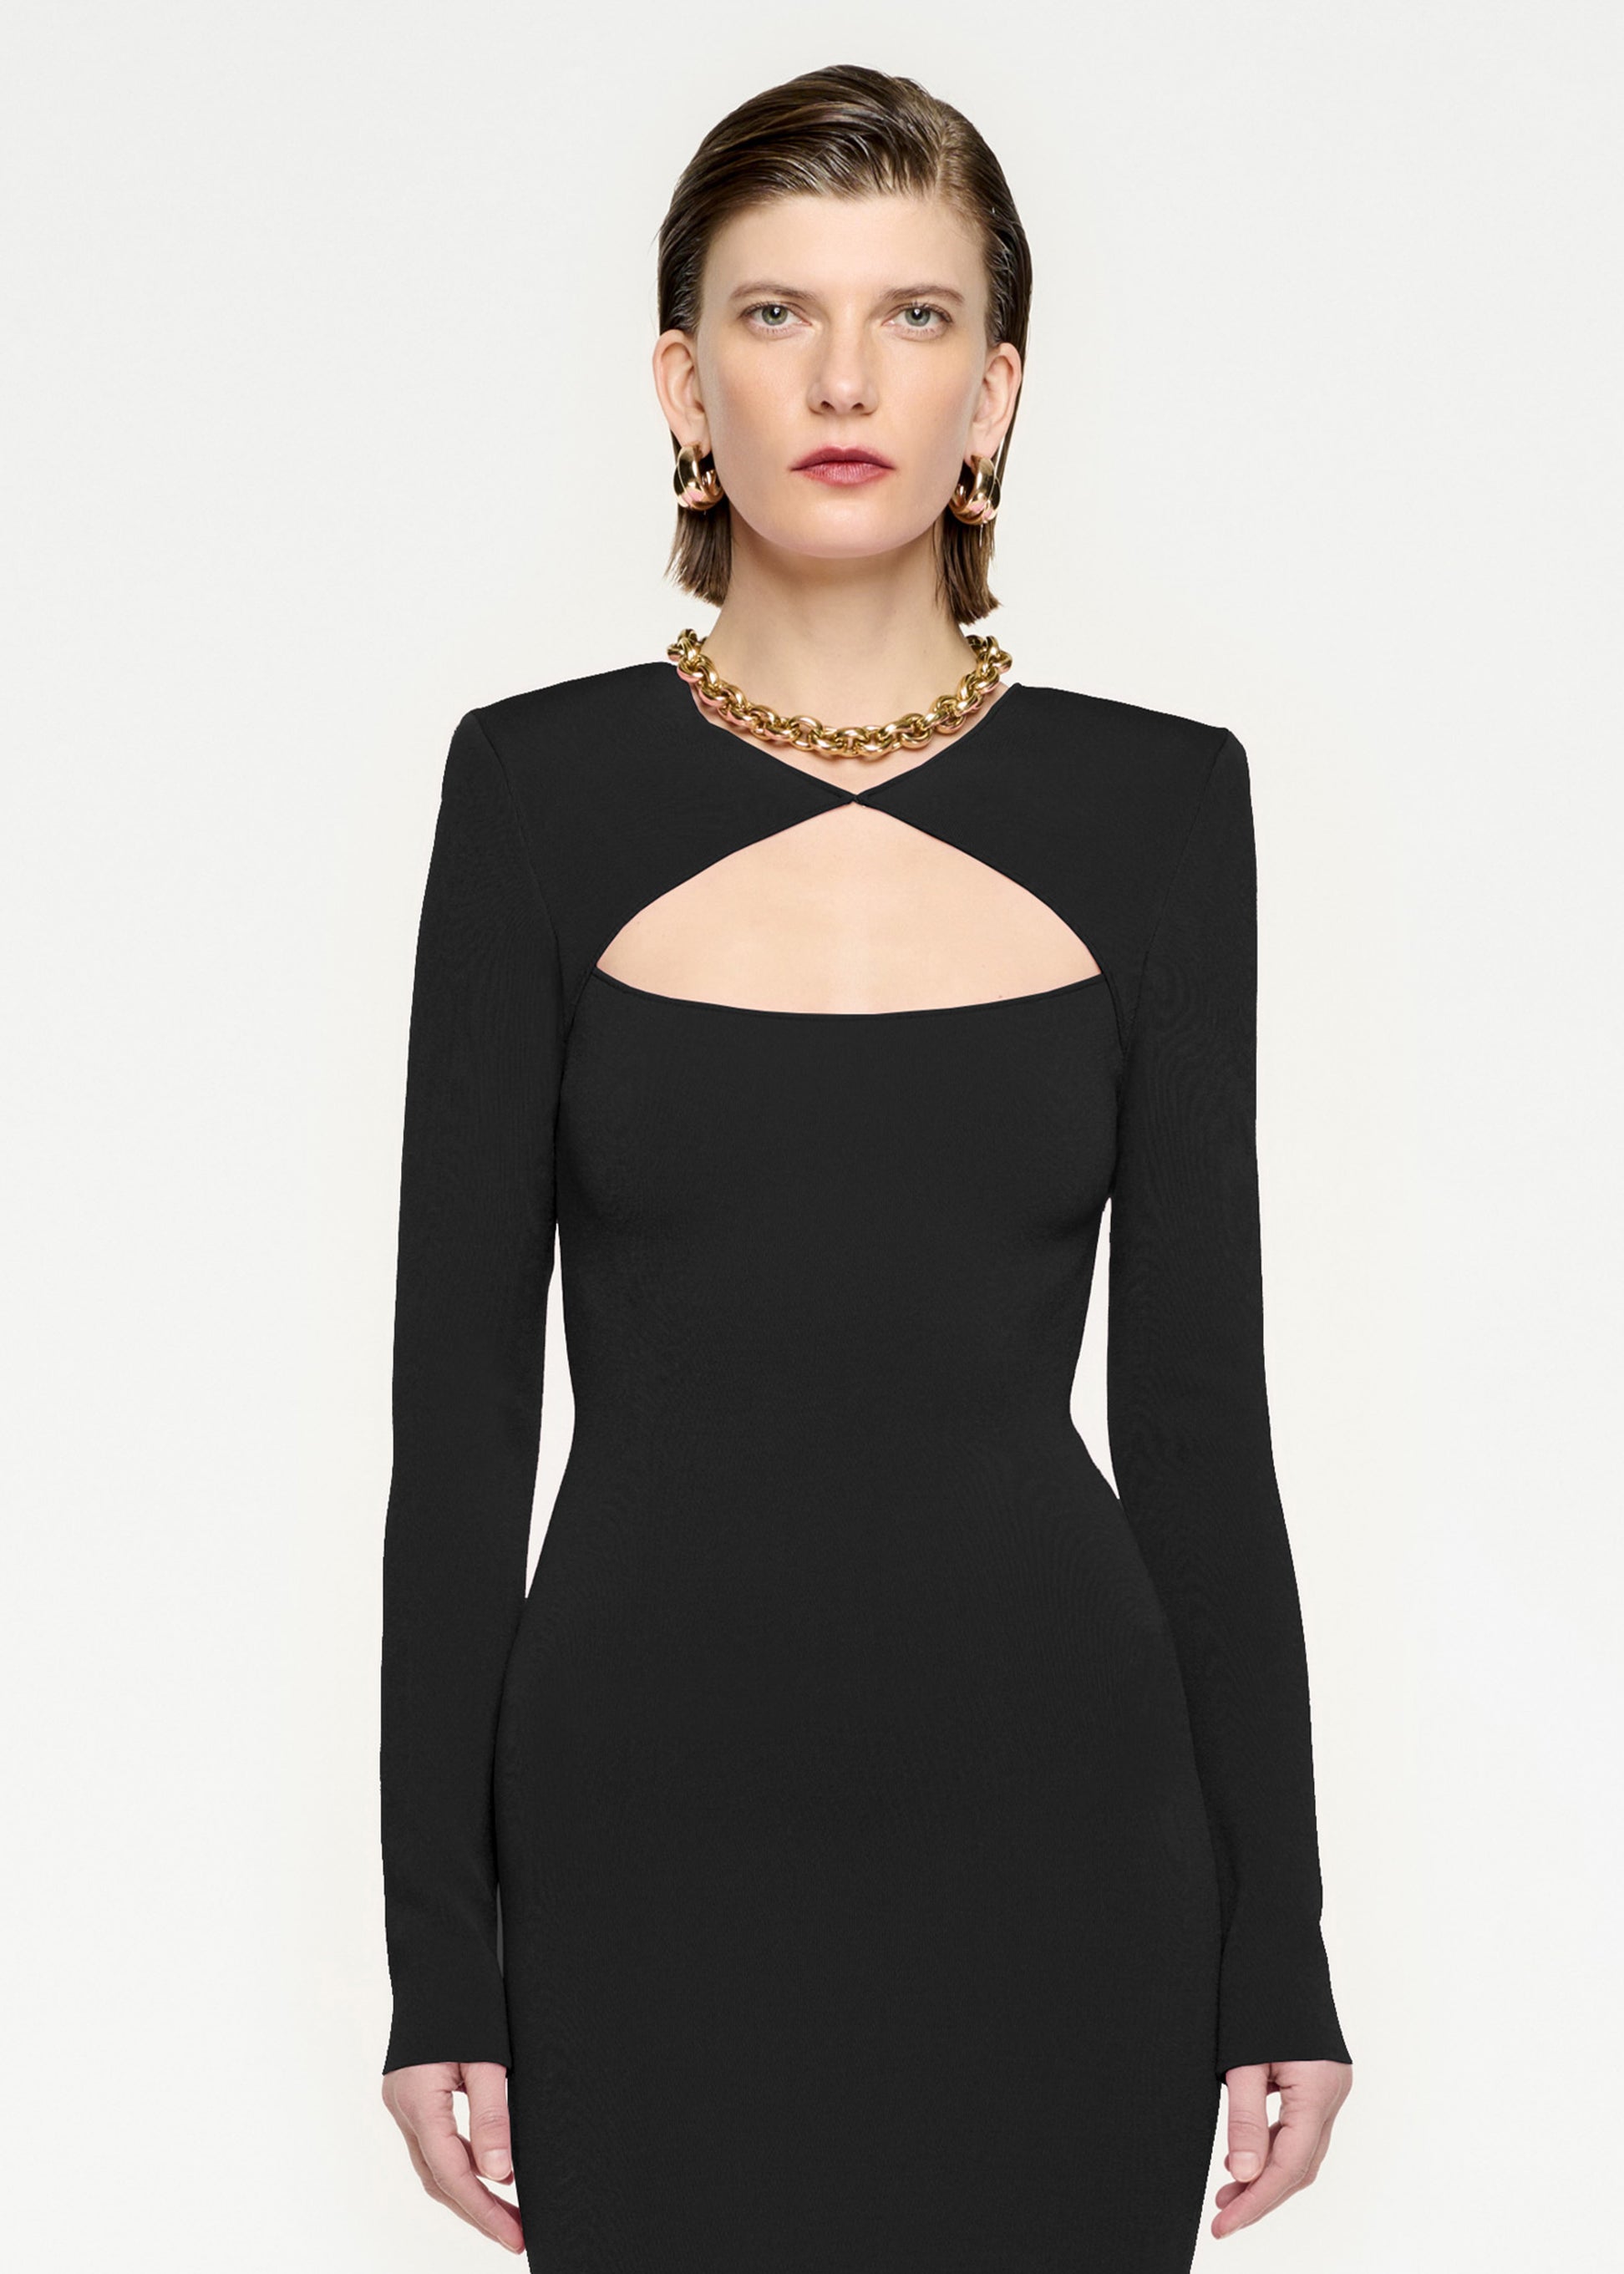 A close up of a woman wearing the Long Sleeve Knit Midi Dress in Black